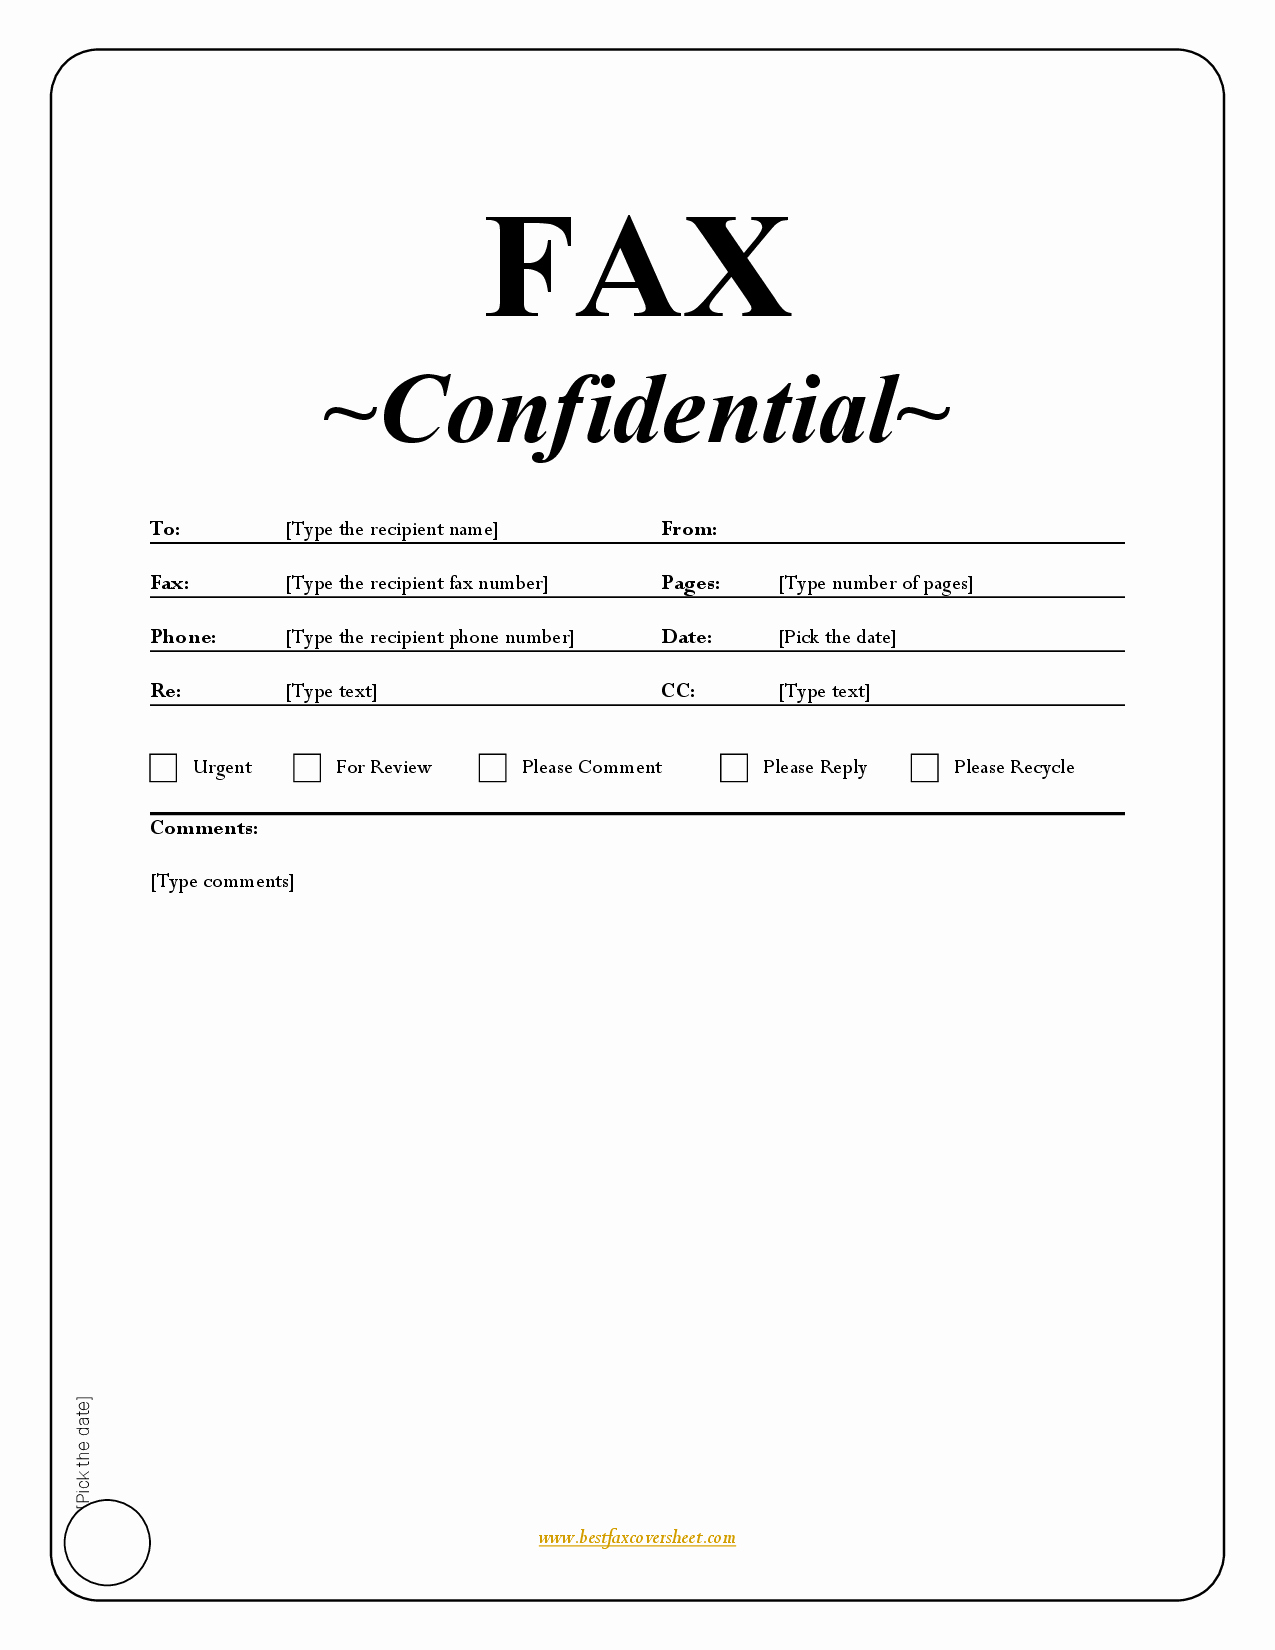 Medical Office Fax Cover Sheet Awesome Printable Fax Cover Sheet with Confidentiality Statement